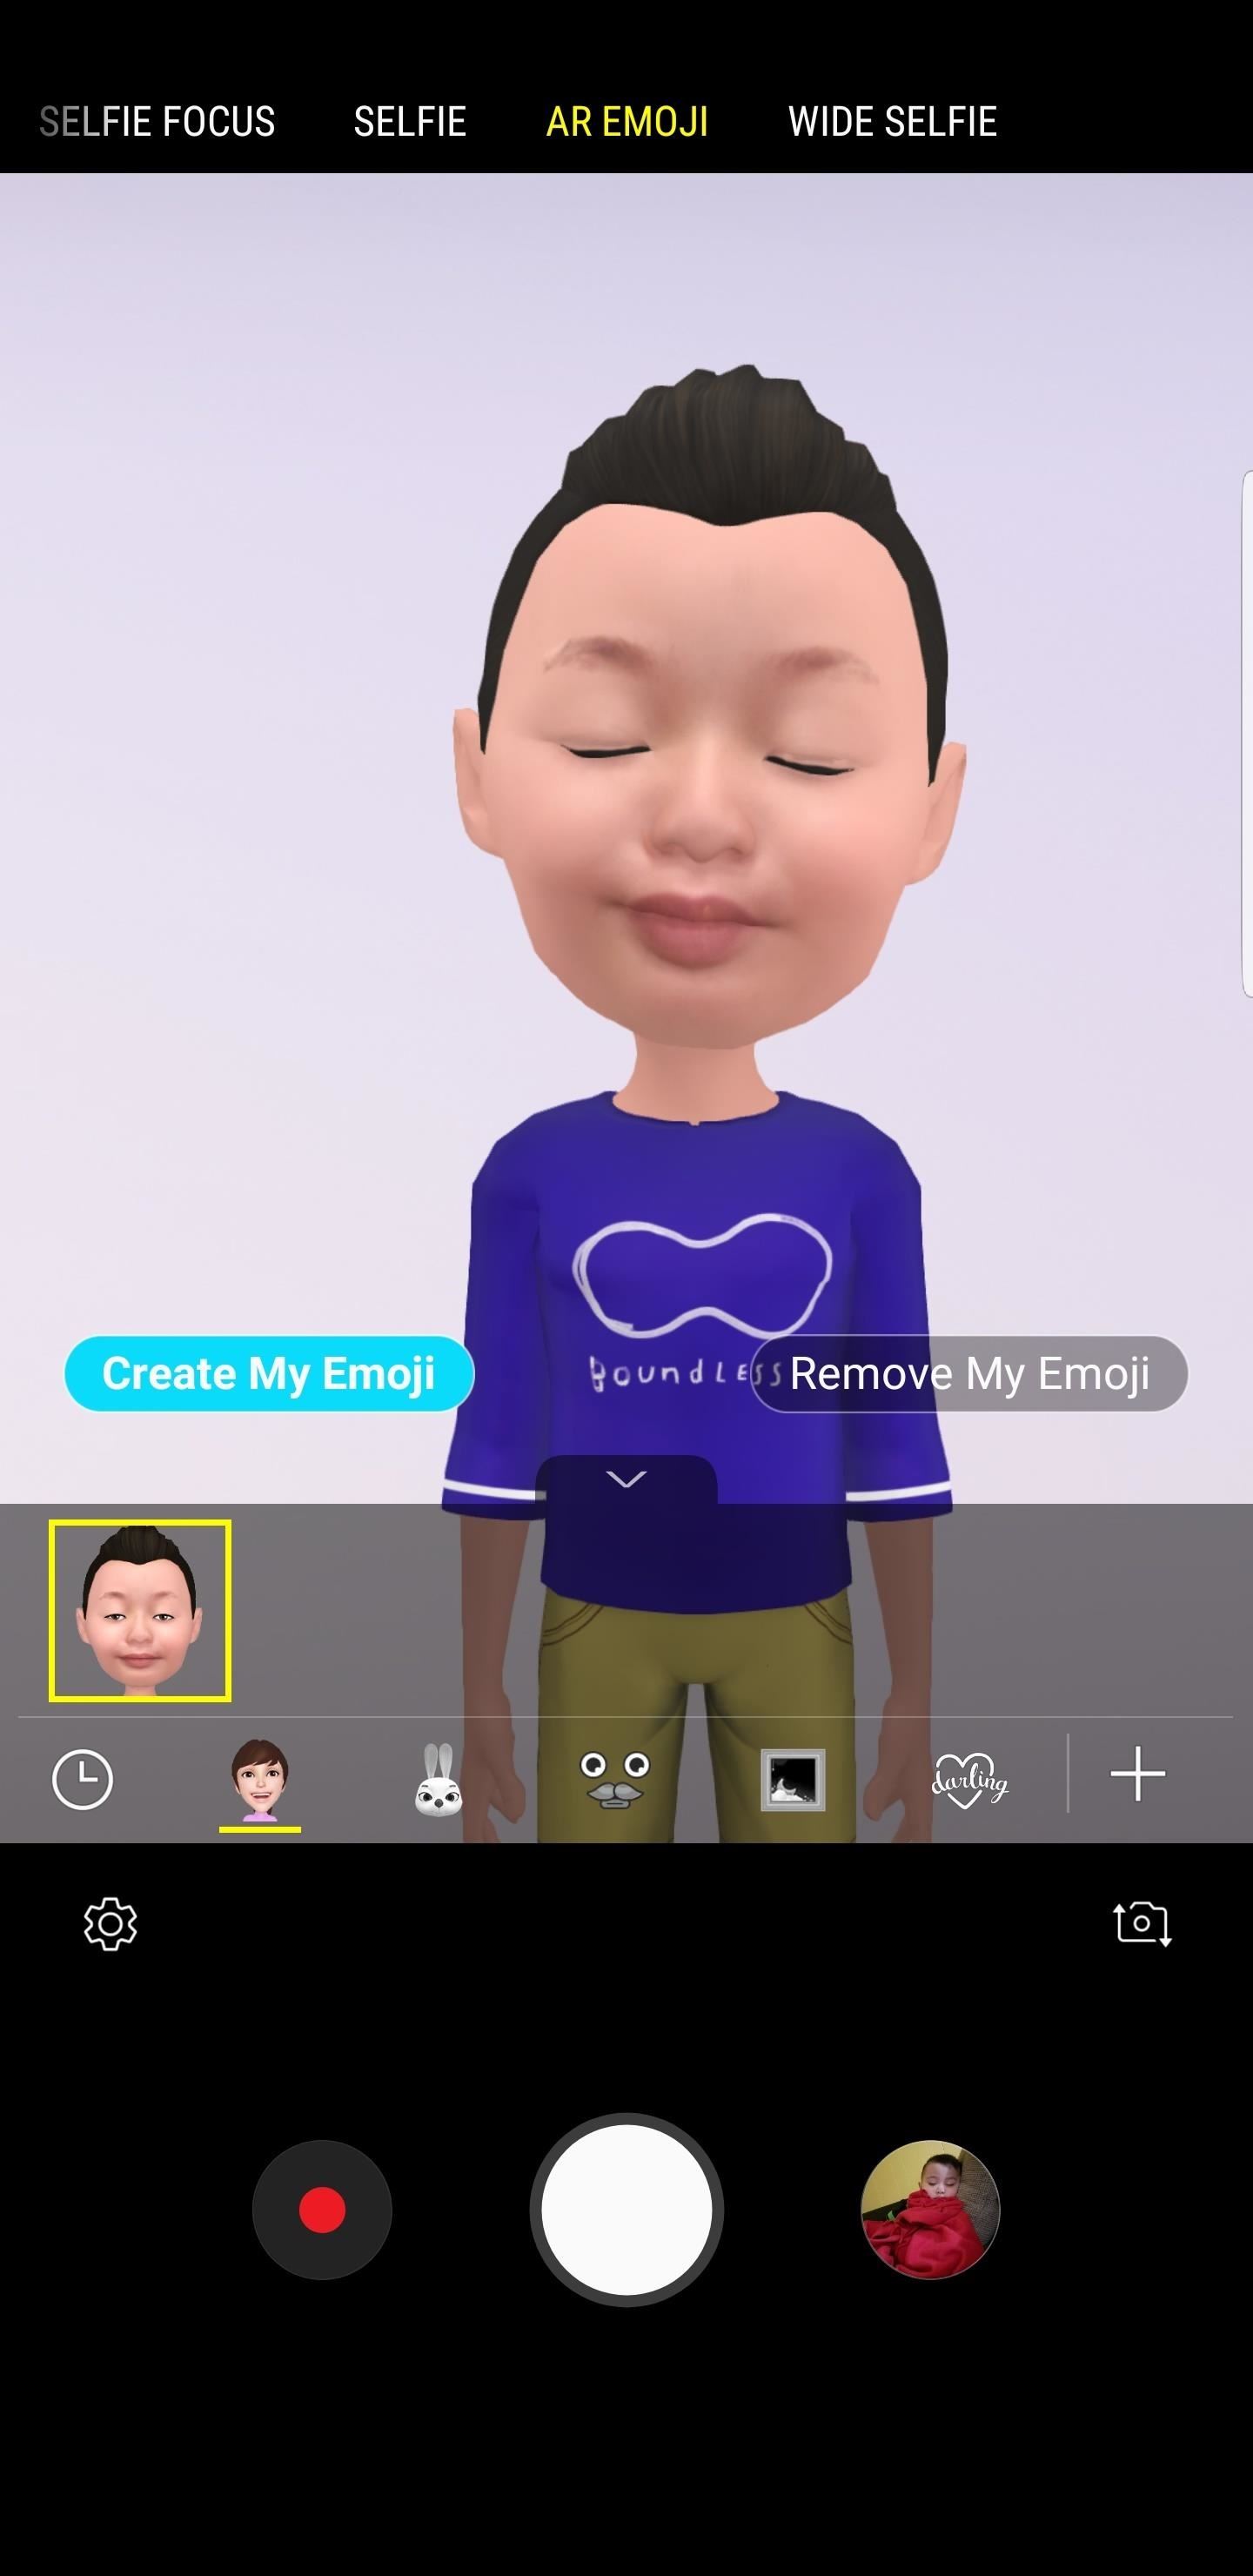 How to Make an AR Emoji with the Galaxy S9